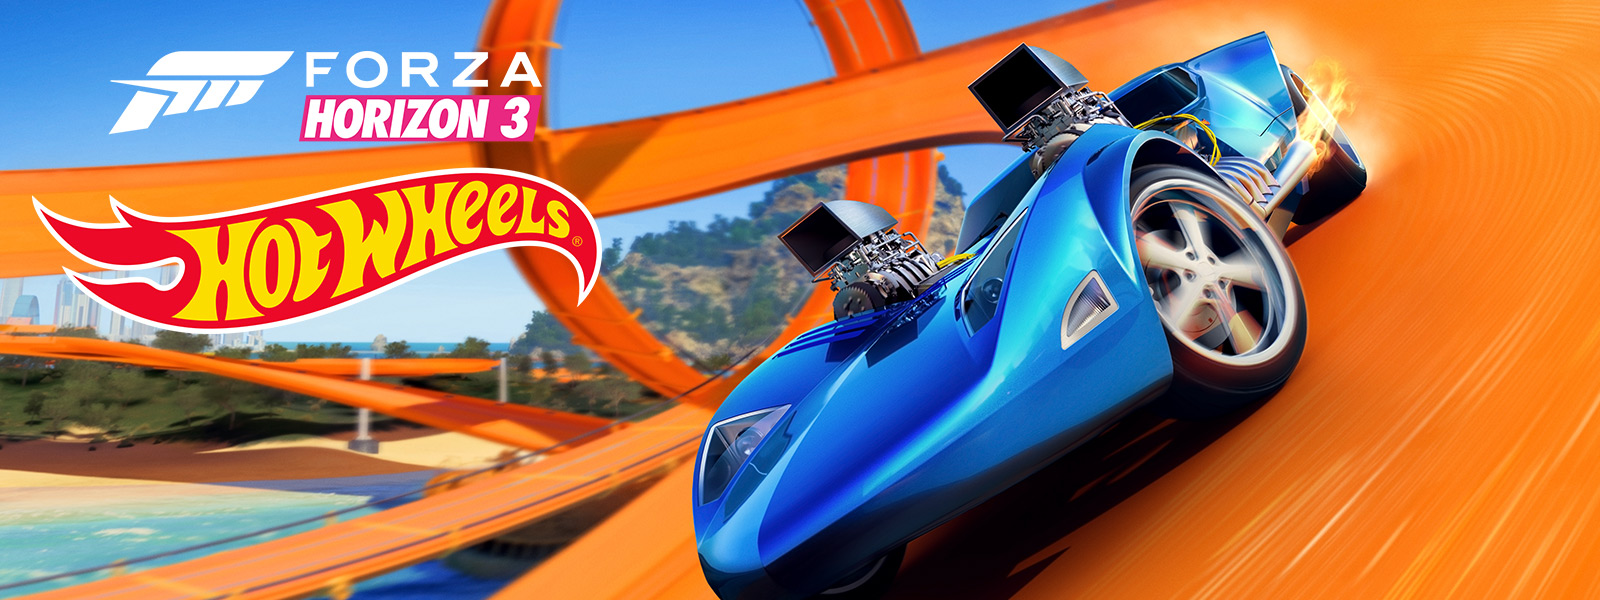 xbox hotwheels unleashed download free